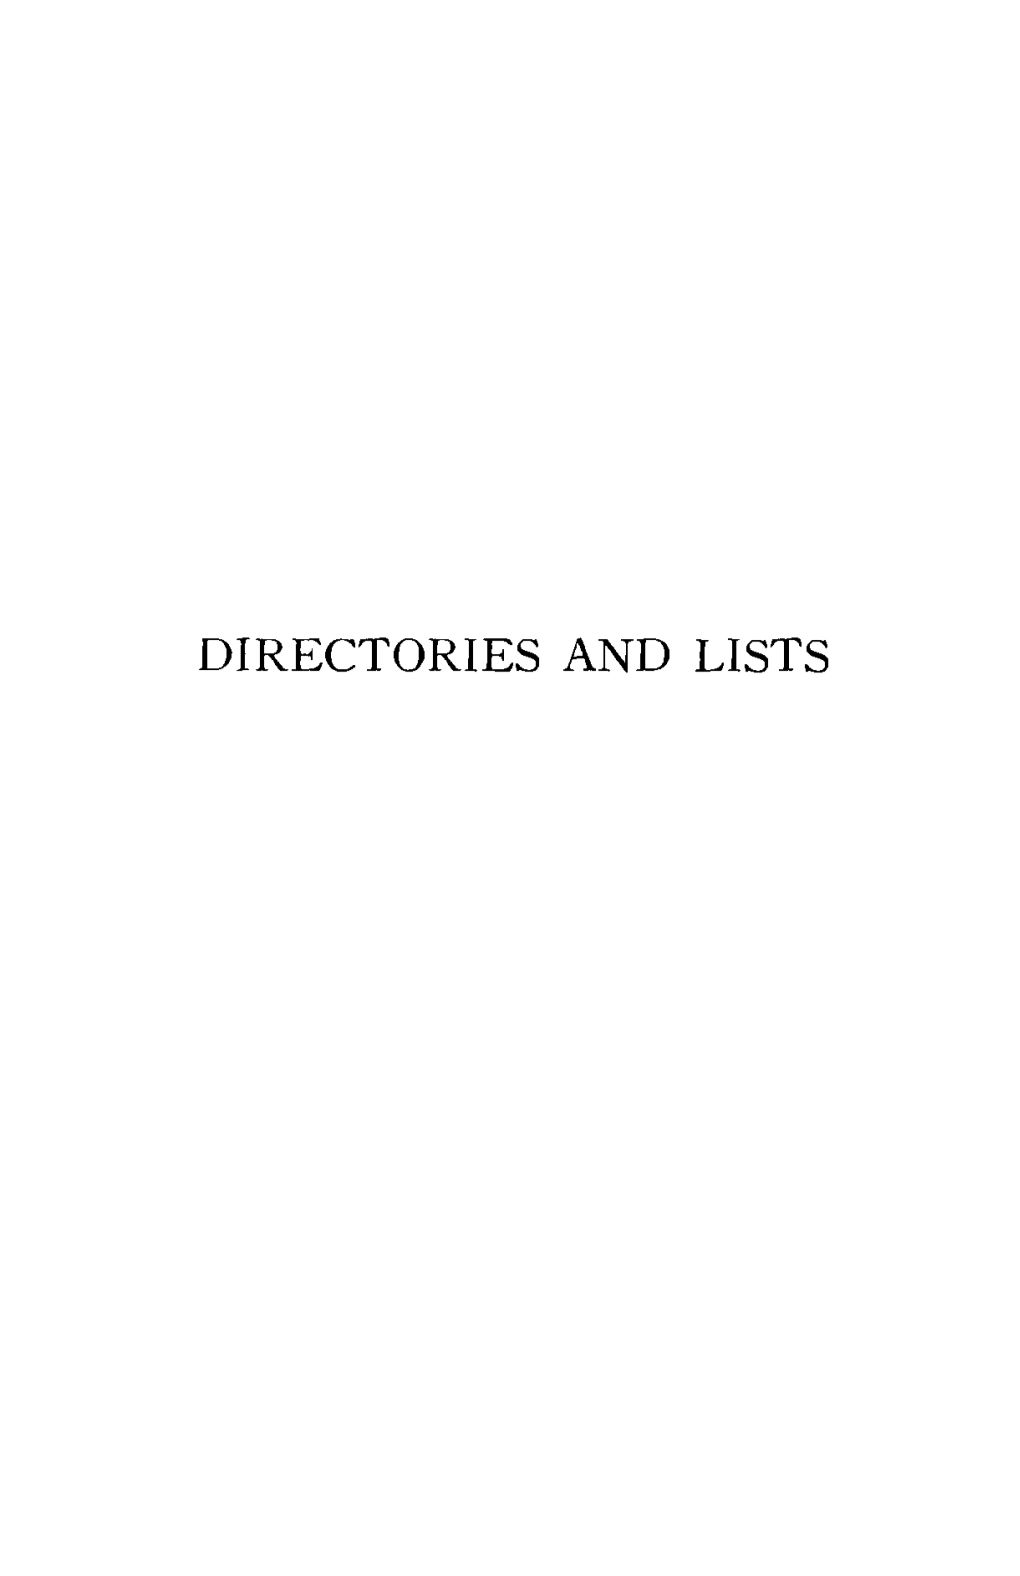 Directories and Lists Editorial Note